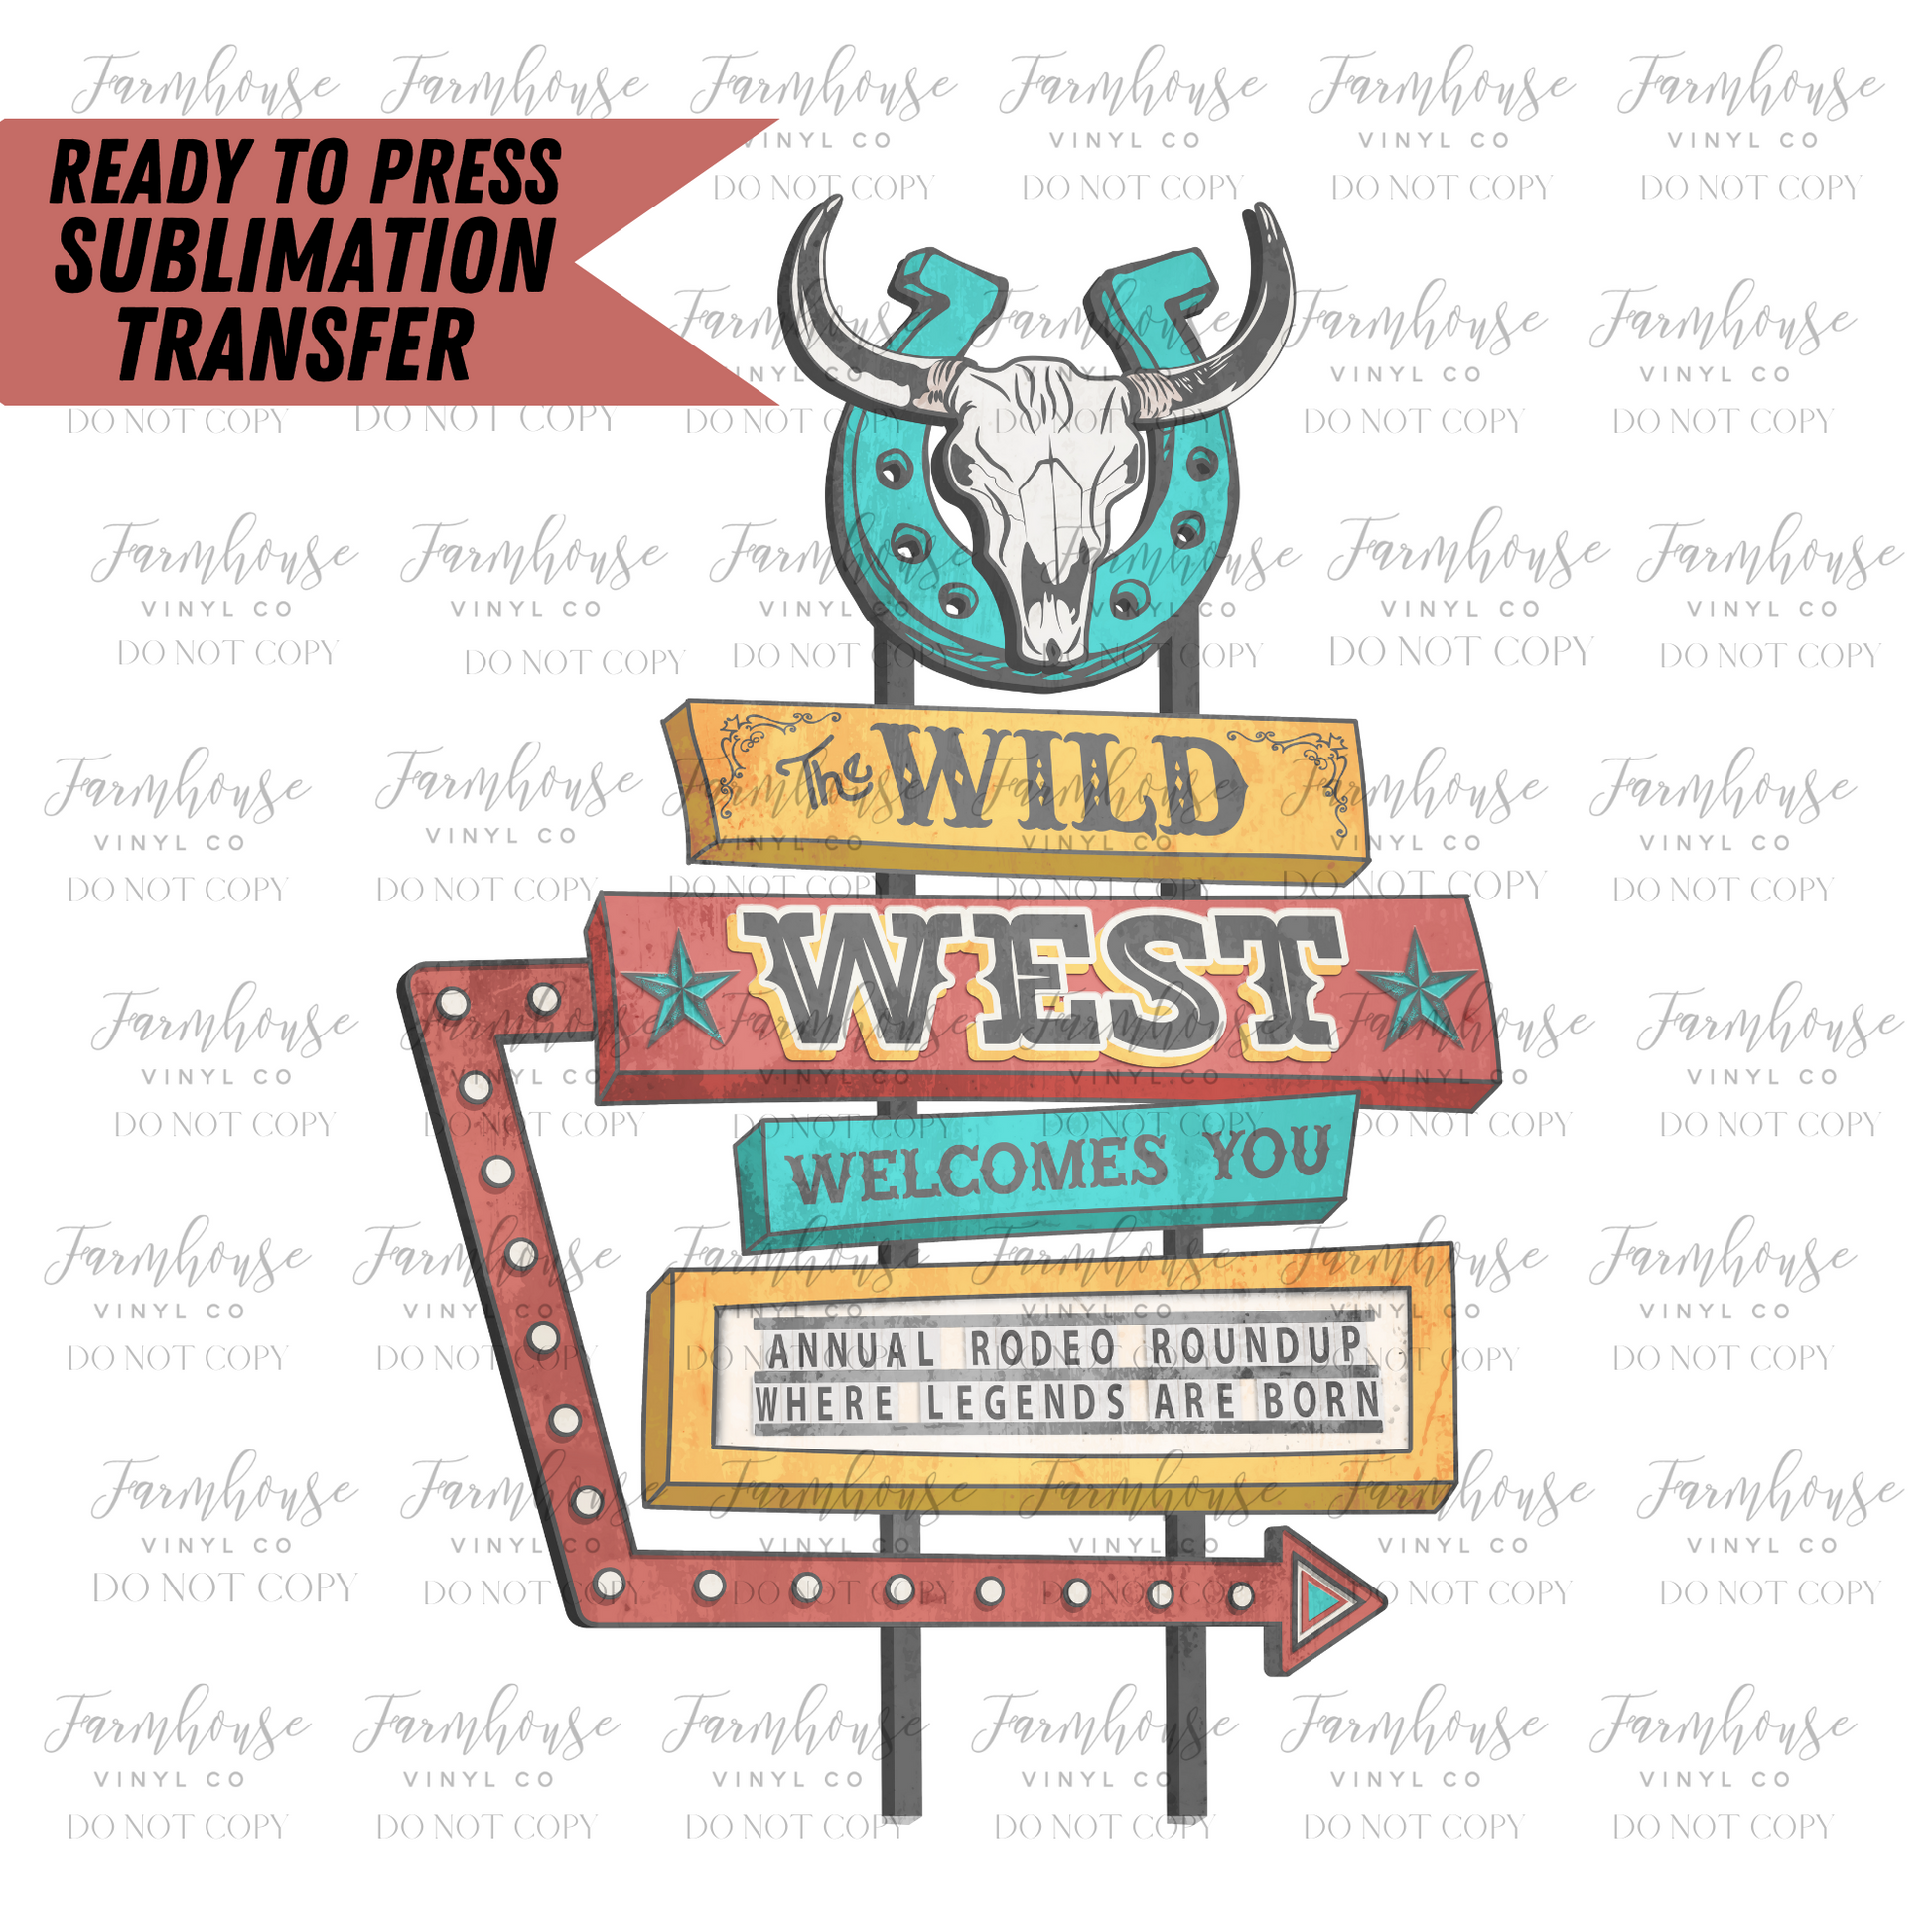 Wild West Welcomes You Ready To Press Sublimation Transfer Design - Farmhouse Vinyl Co